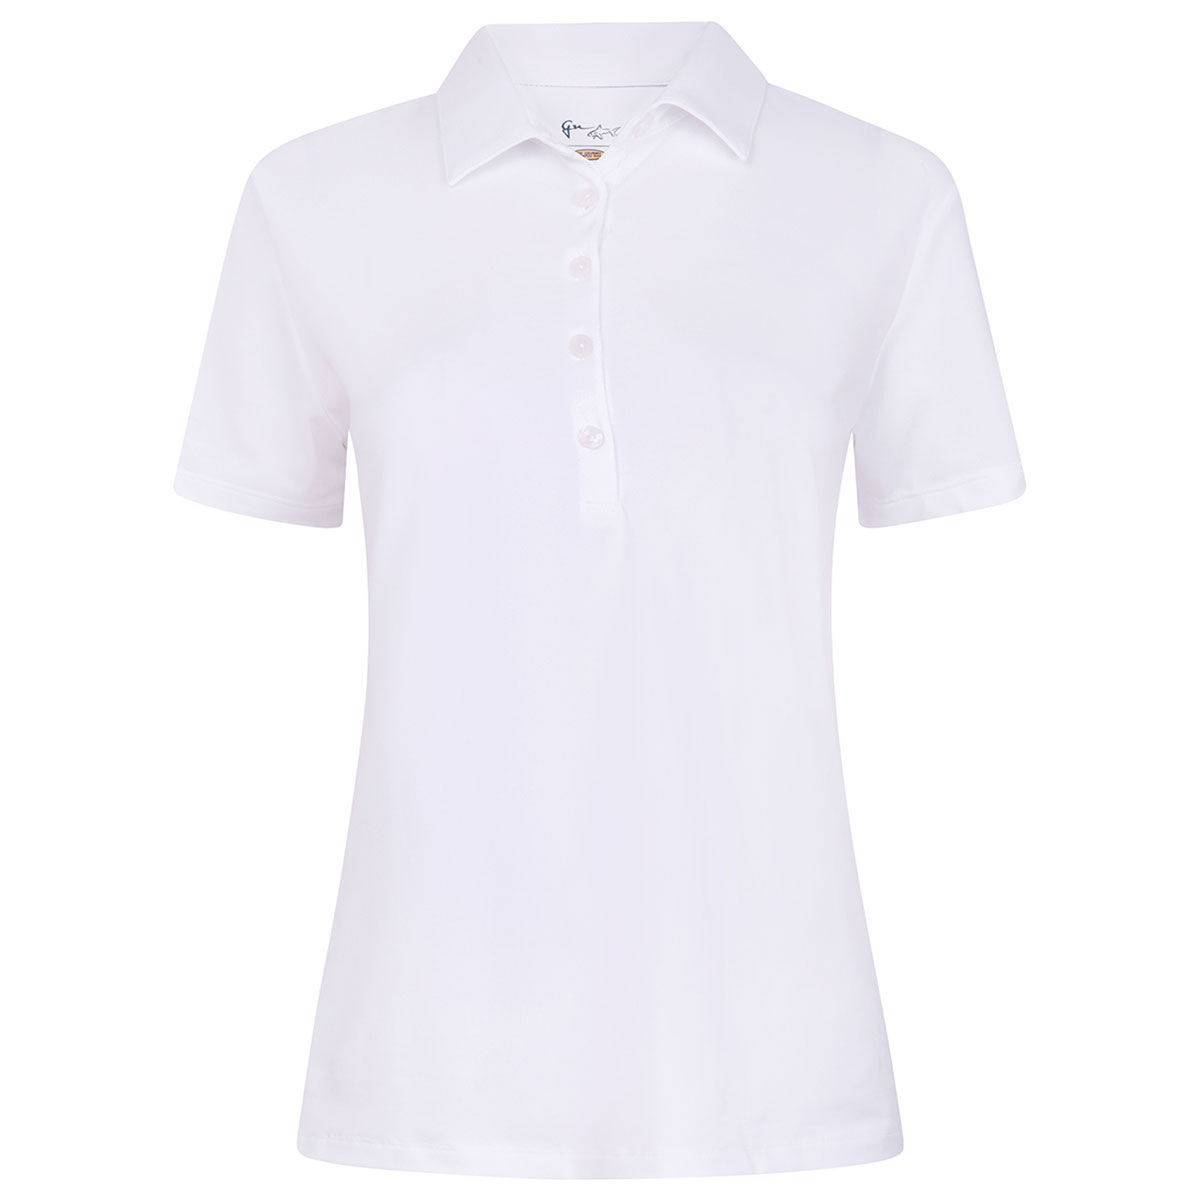 Greg Norman White Embroidered Freedom Pique Golf Polo Shirt, Womens | American Golf, Size: XS von Greg Norman